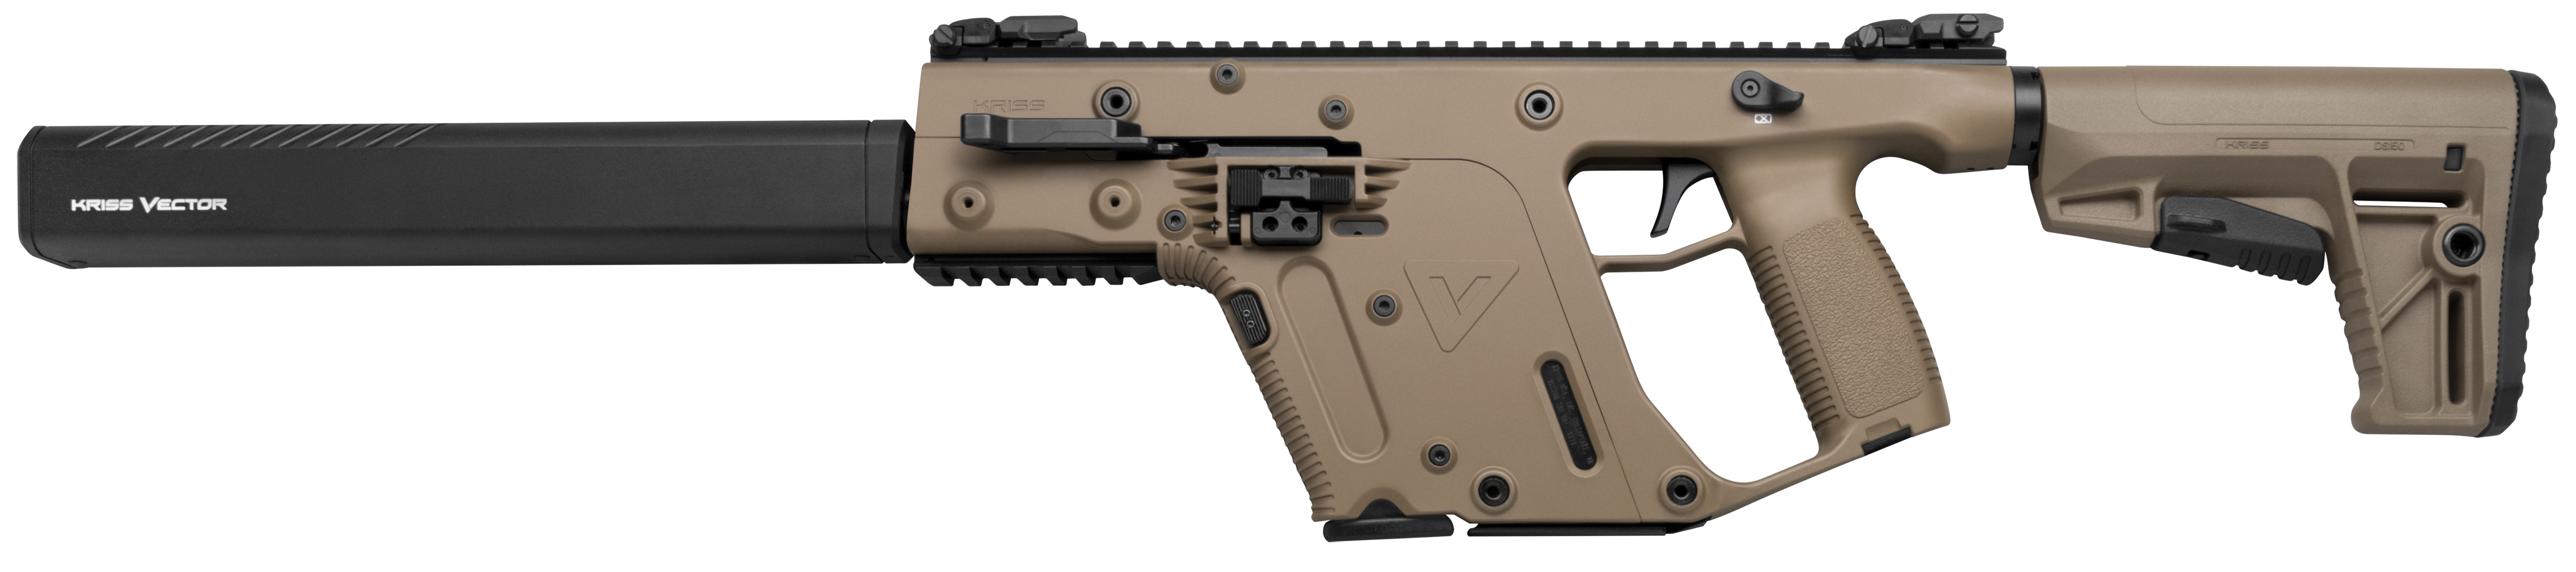 KRISS VECTOR CRB G2 40SW 16